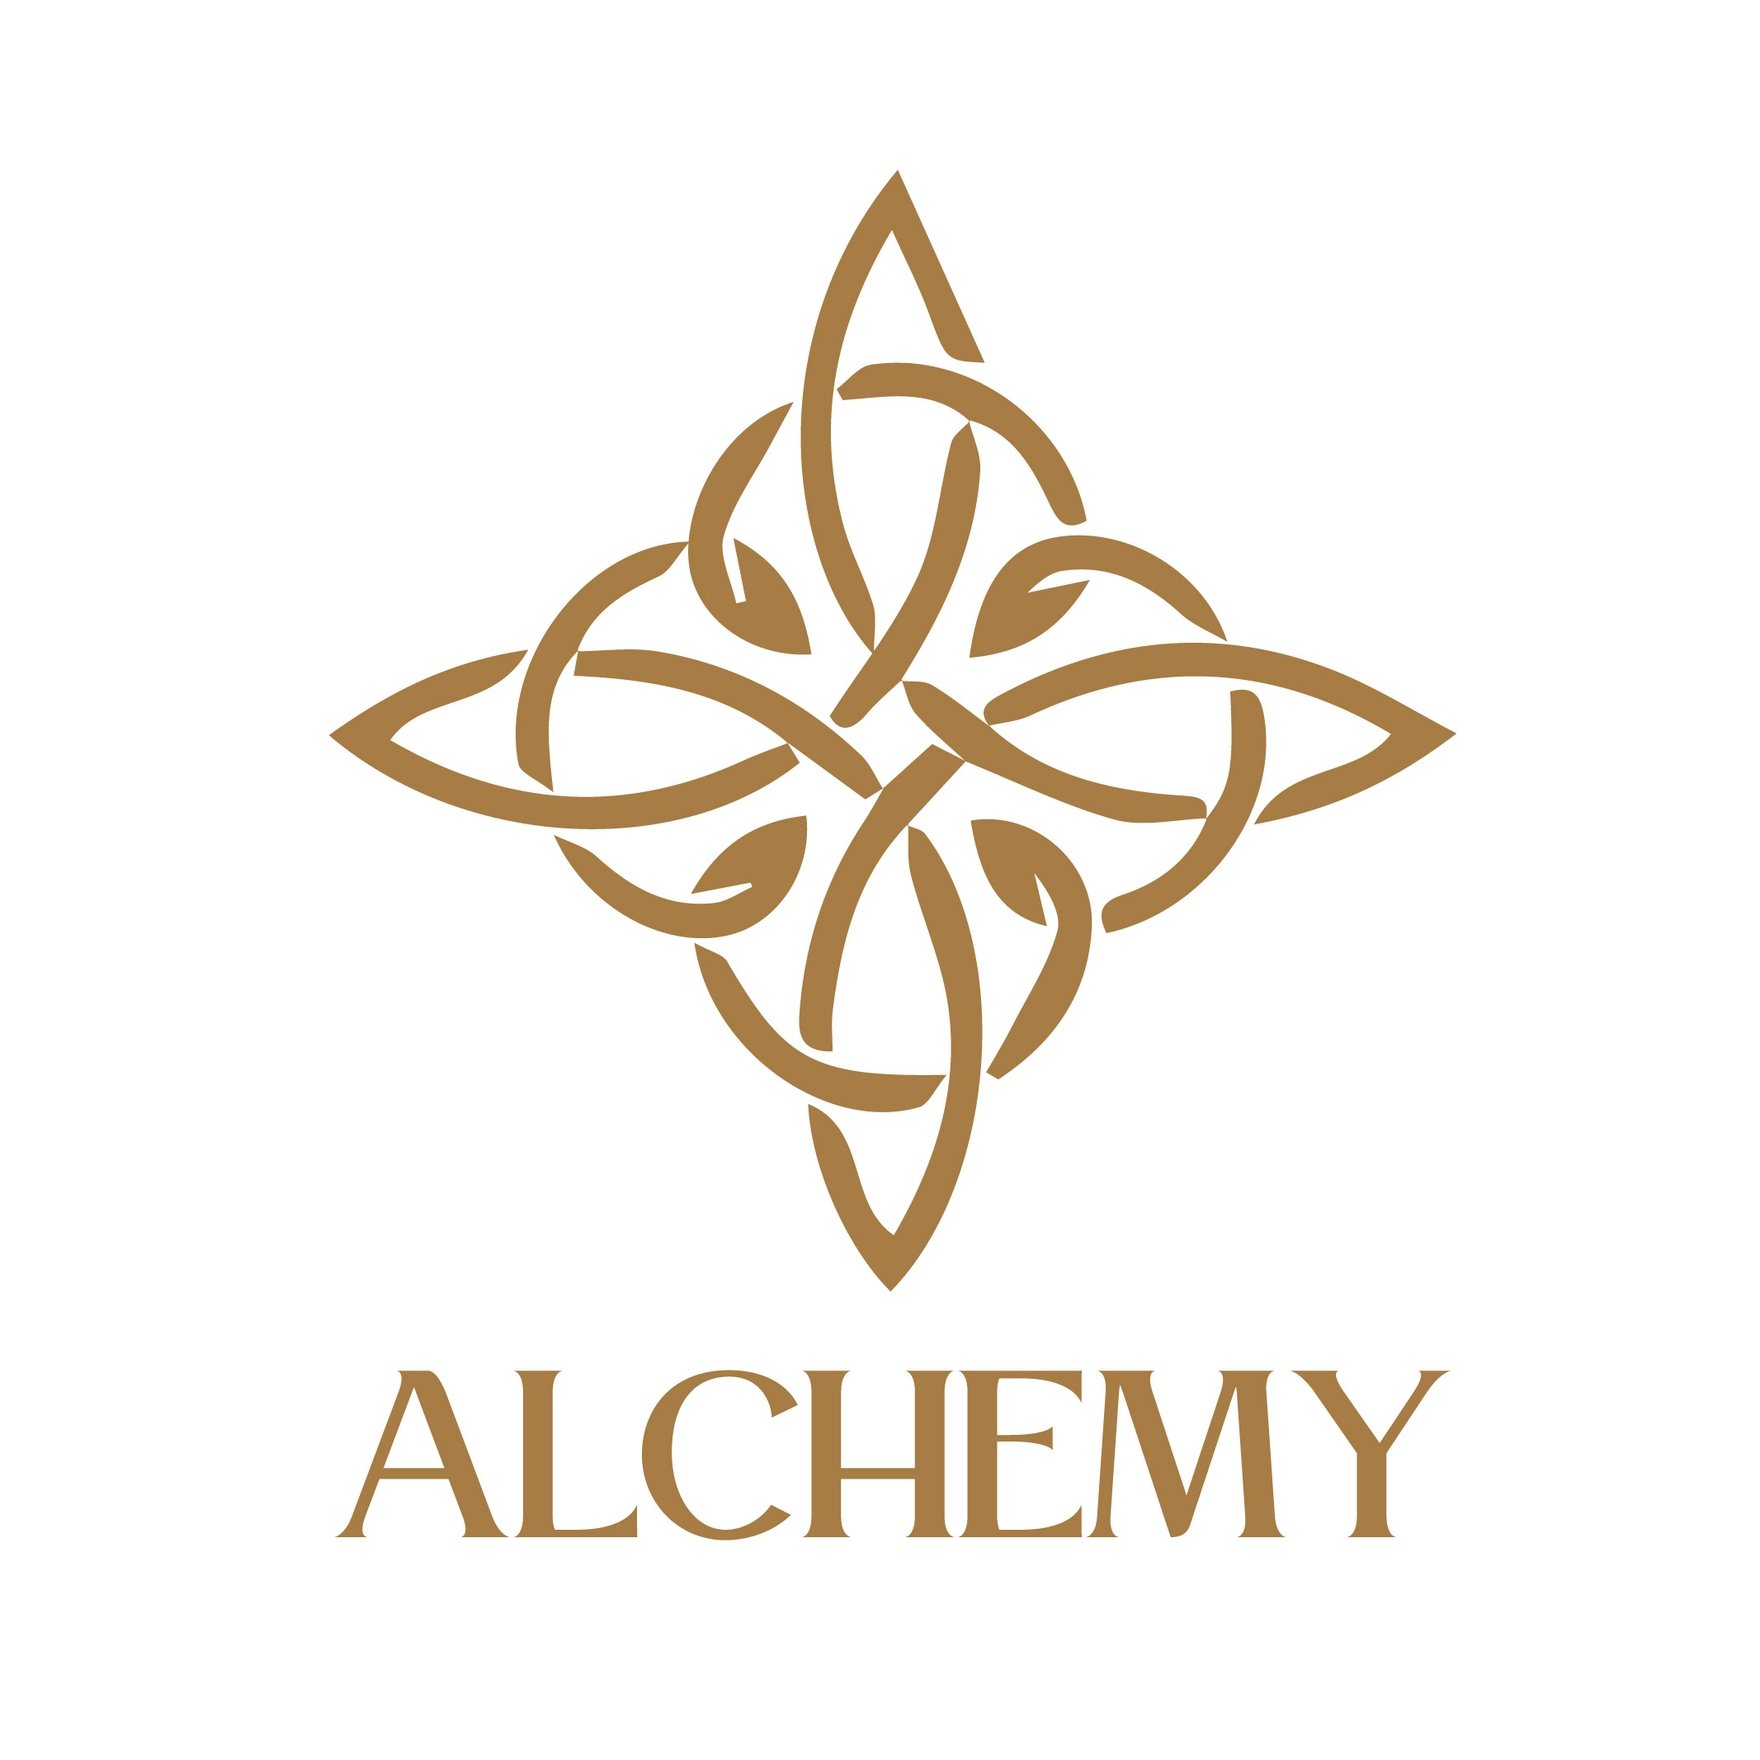 Alchemy Announces New $200M Investment at $10.2B Valuation, Led by  Lightspeed and Silver Lake